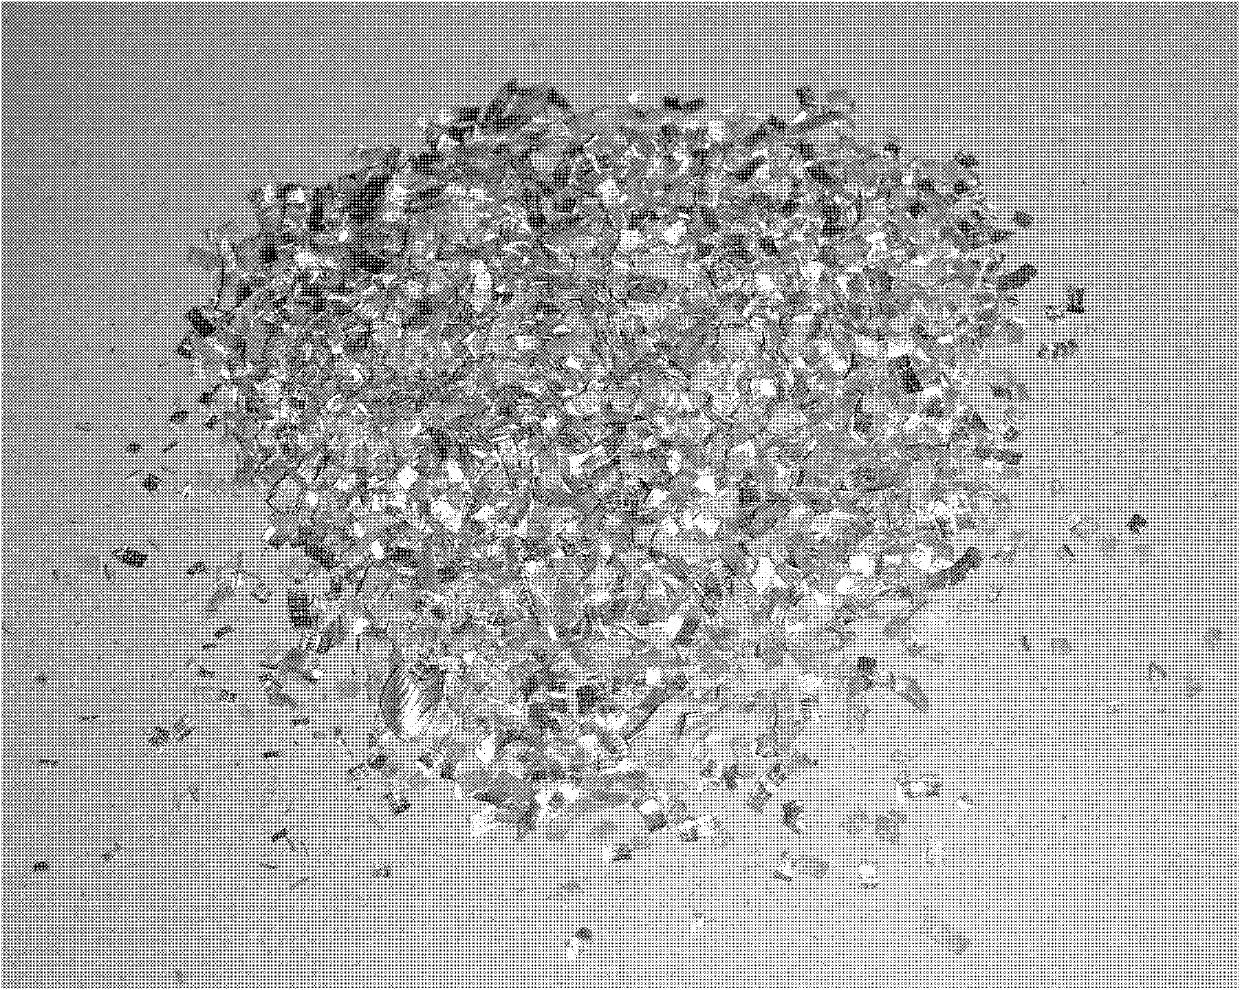 Lead-free easily cut and deformed SnZnBi aluminum alloy